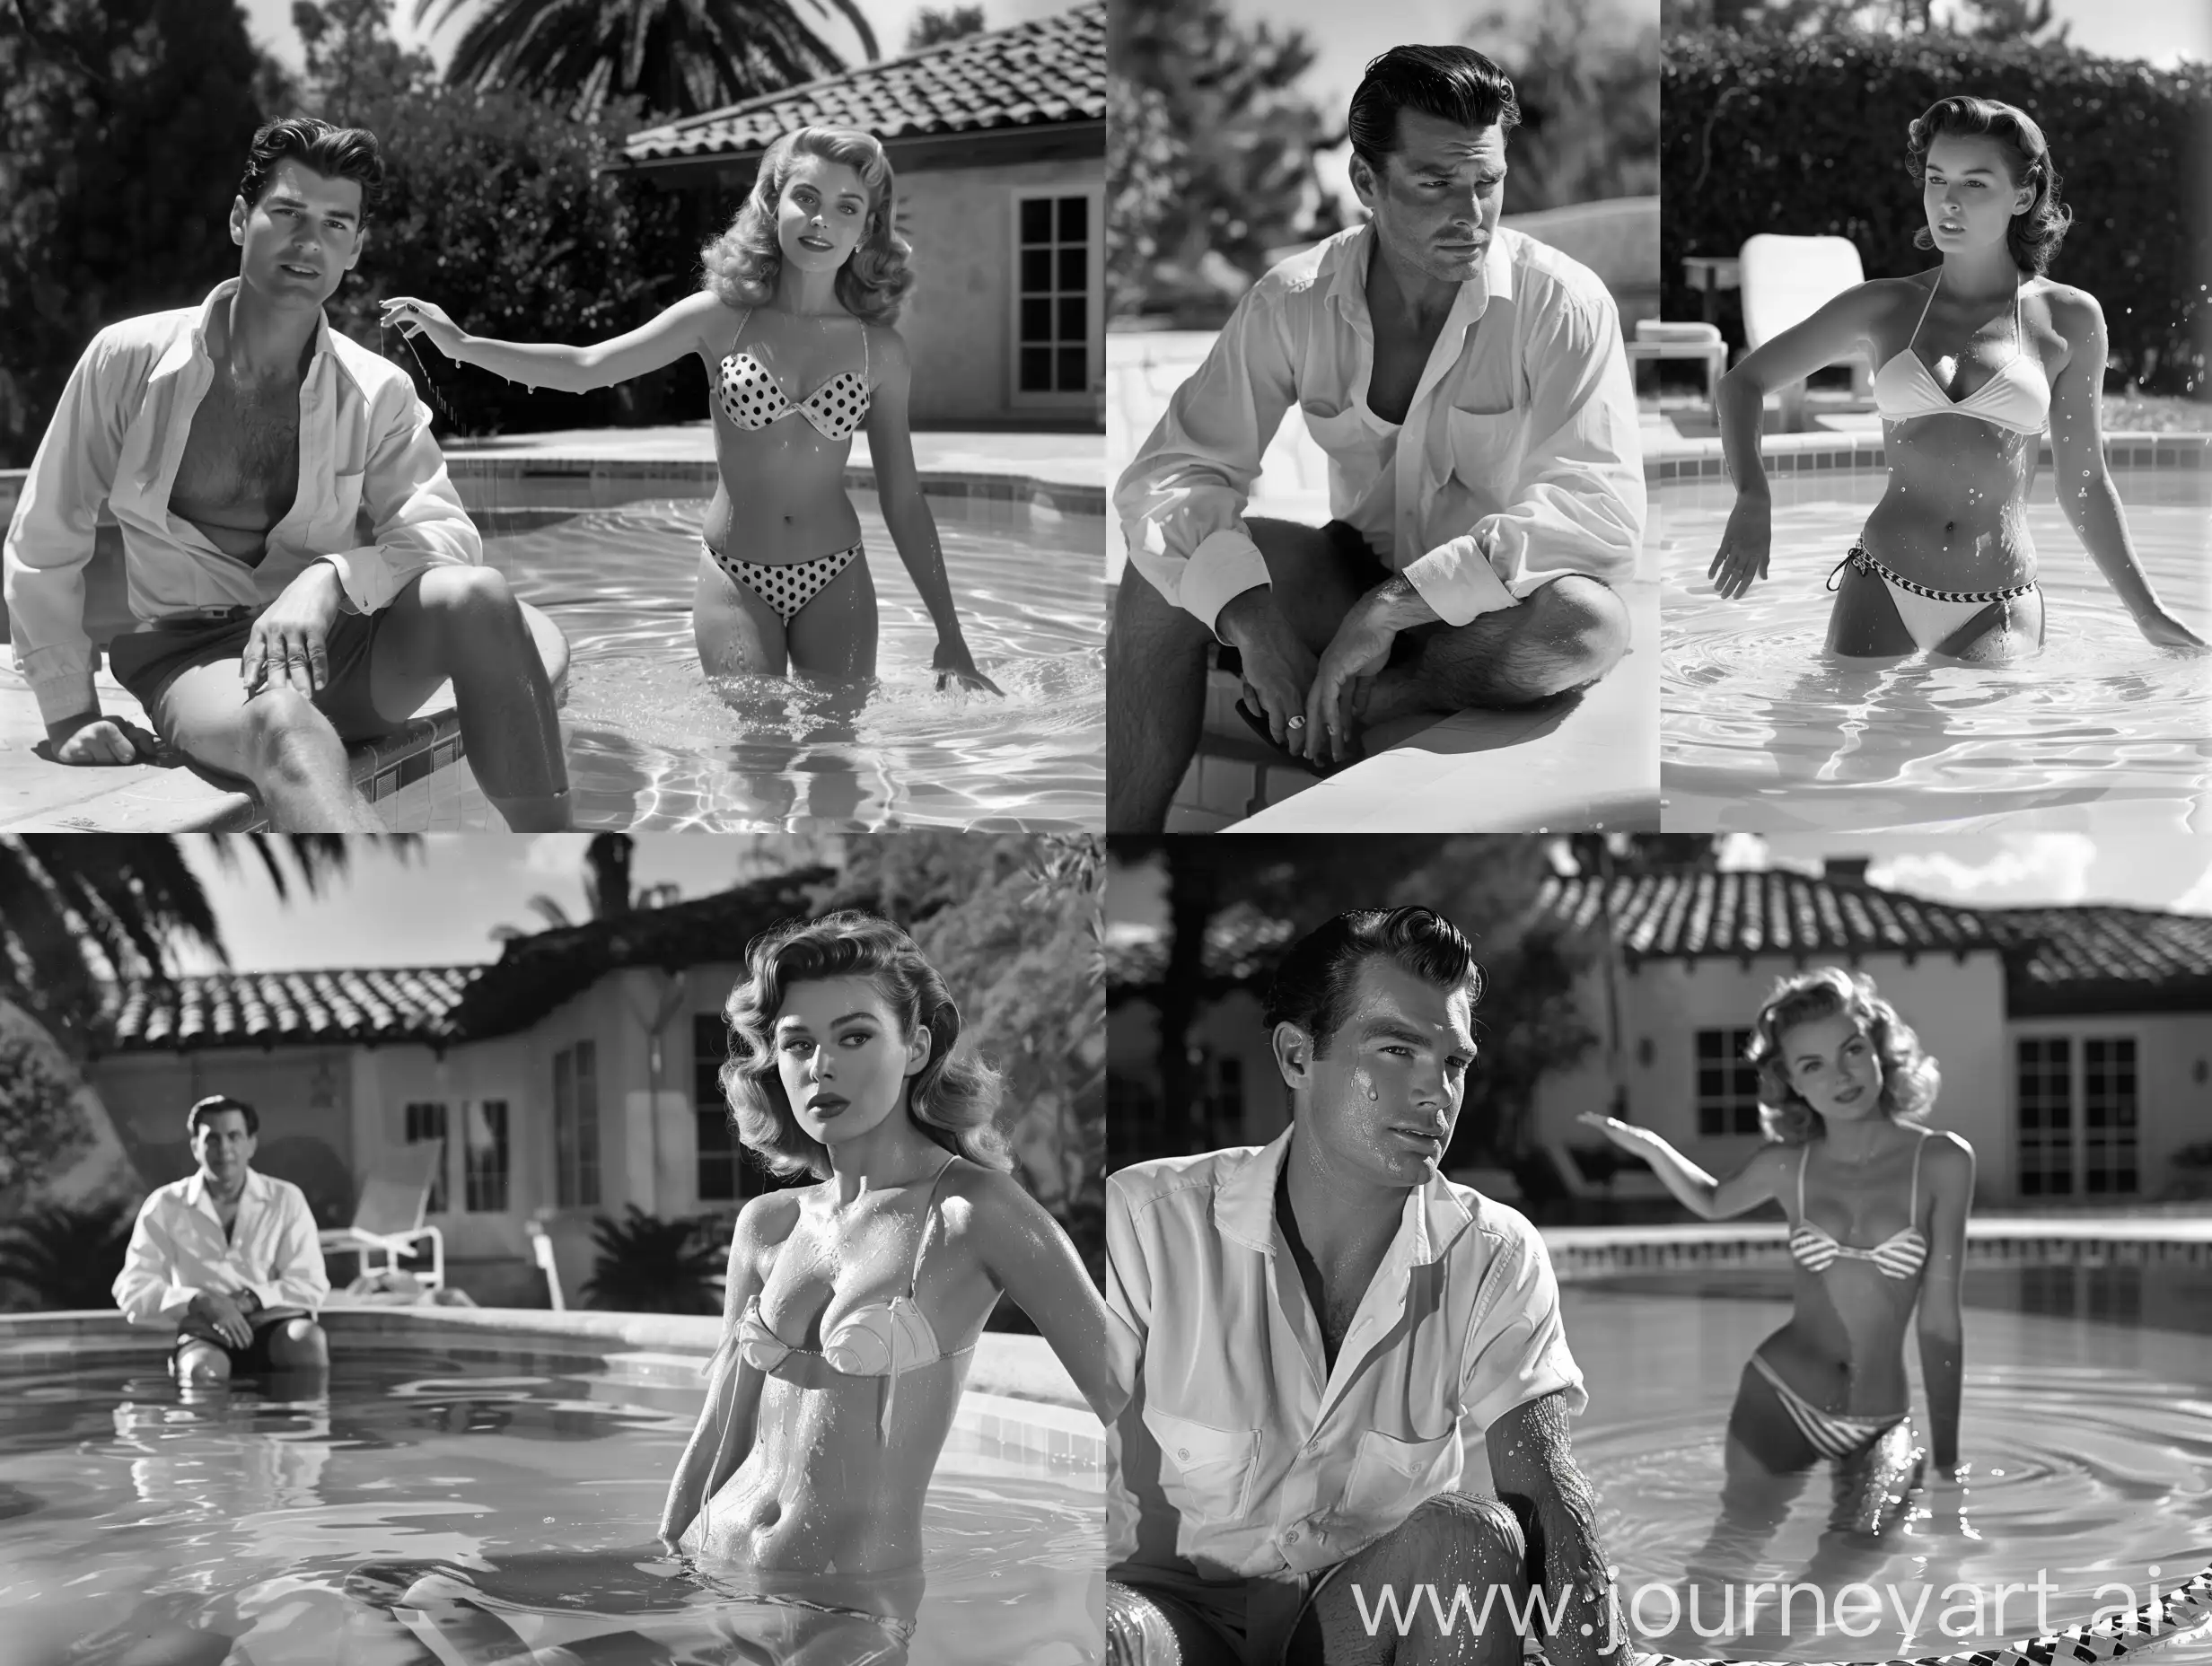 Noir shot of a glamorous 1940s handsome man in white shirt sitting by a pool, a pretty 1940s pinup girl in bikini emerging from the pool soaking in wet, vinatge villa background 